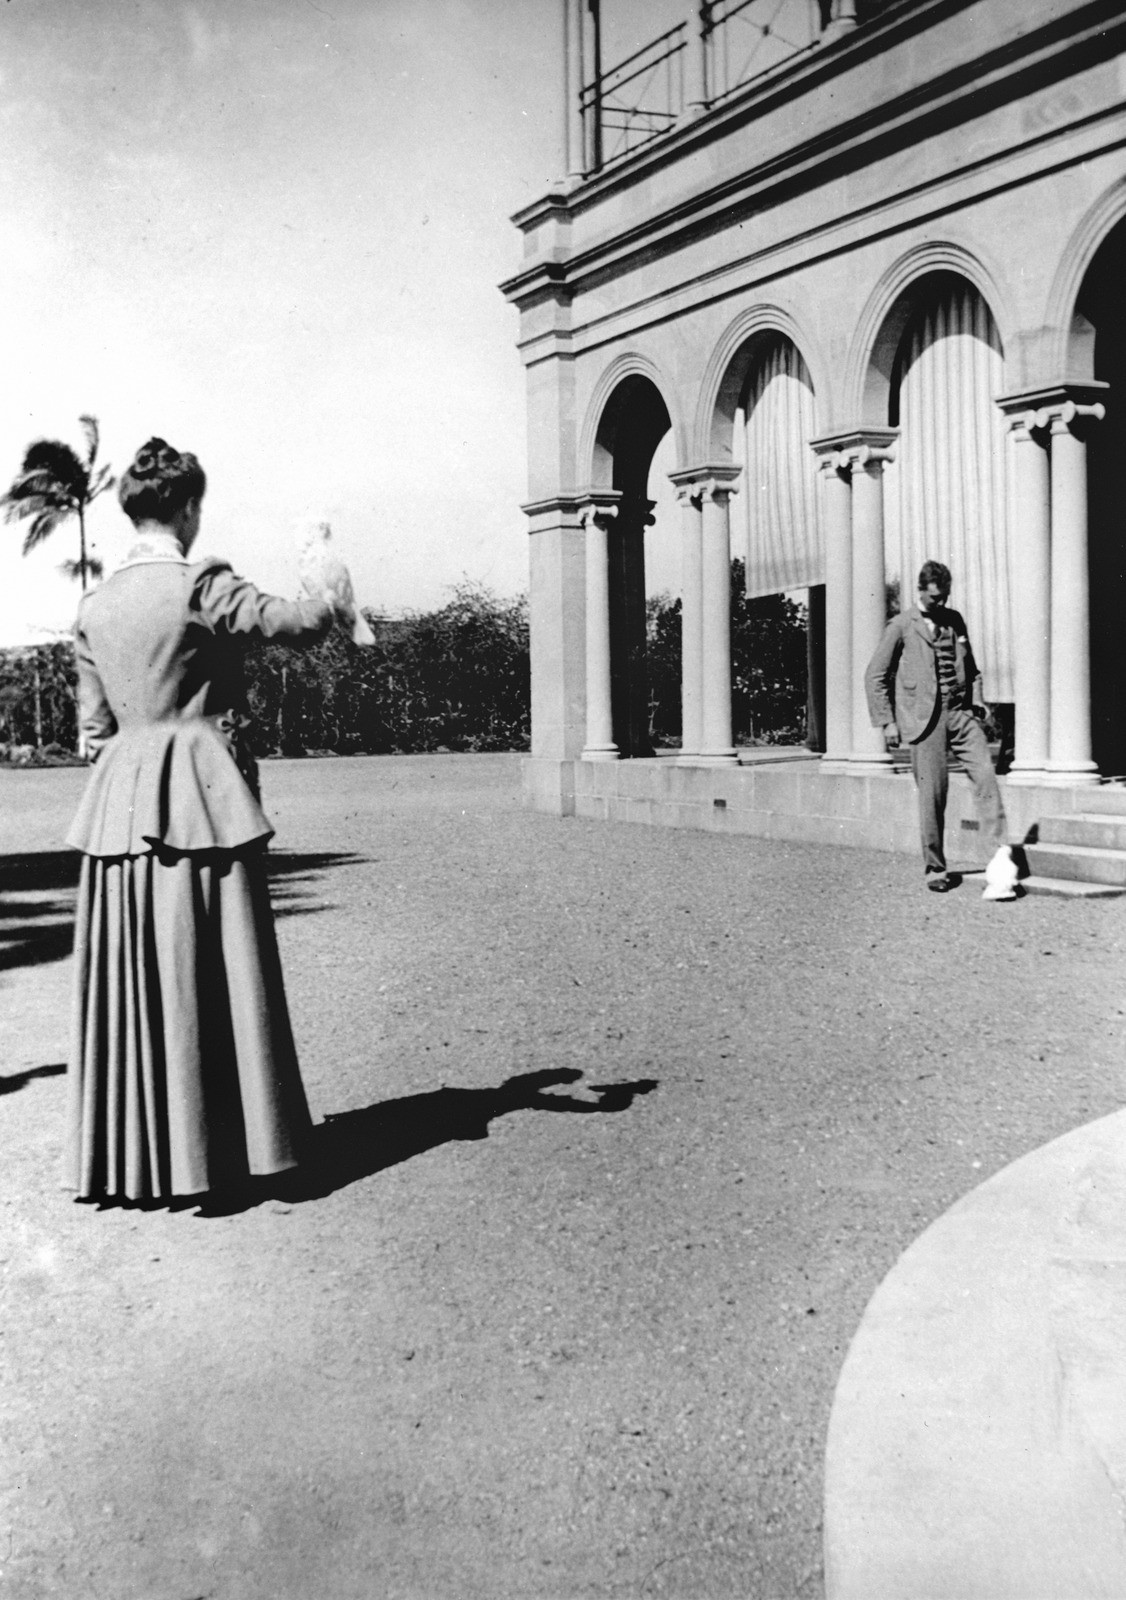 Black and white photo of a woman in a dress with her back to the camera with a bird perched on her hand. At right, a man in a suit looks at a white bird on the ground. The location is Government House, Brisbane.